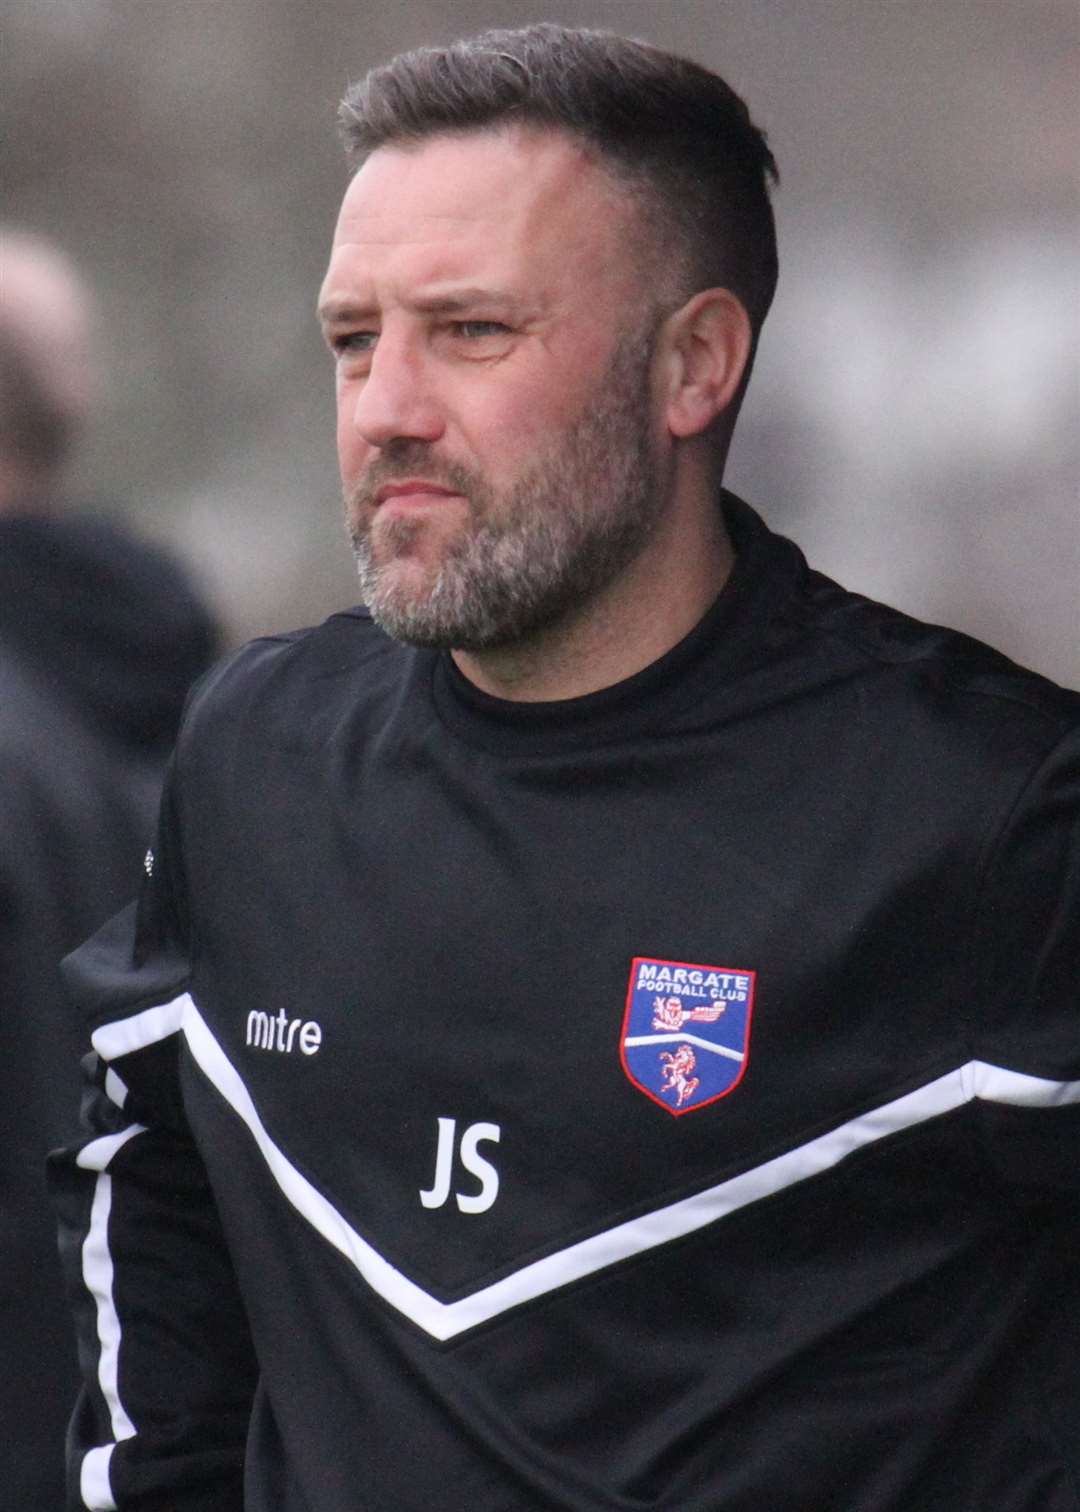 Margate manager Jay Saunders